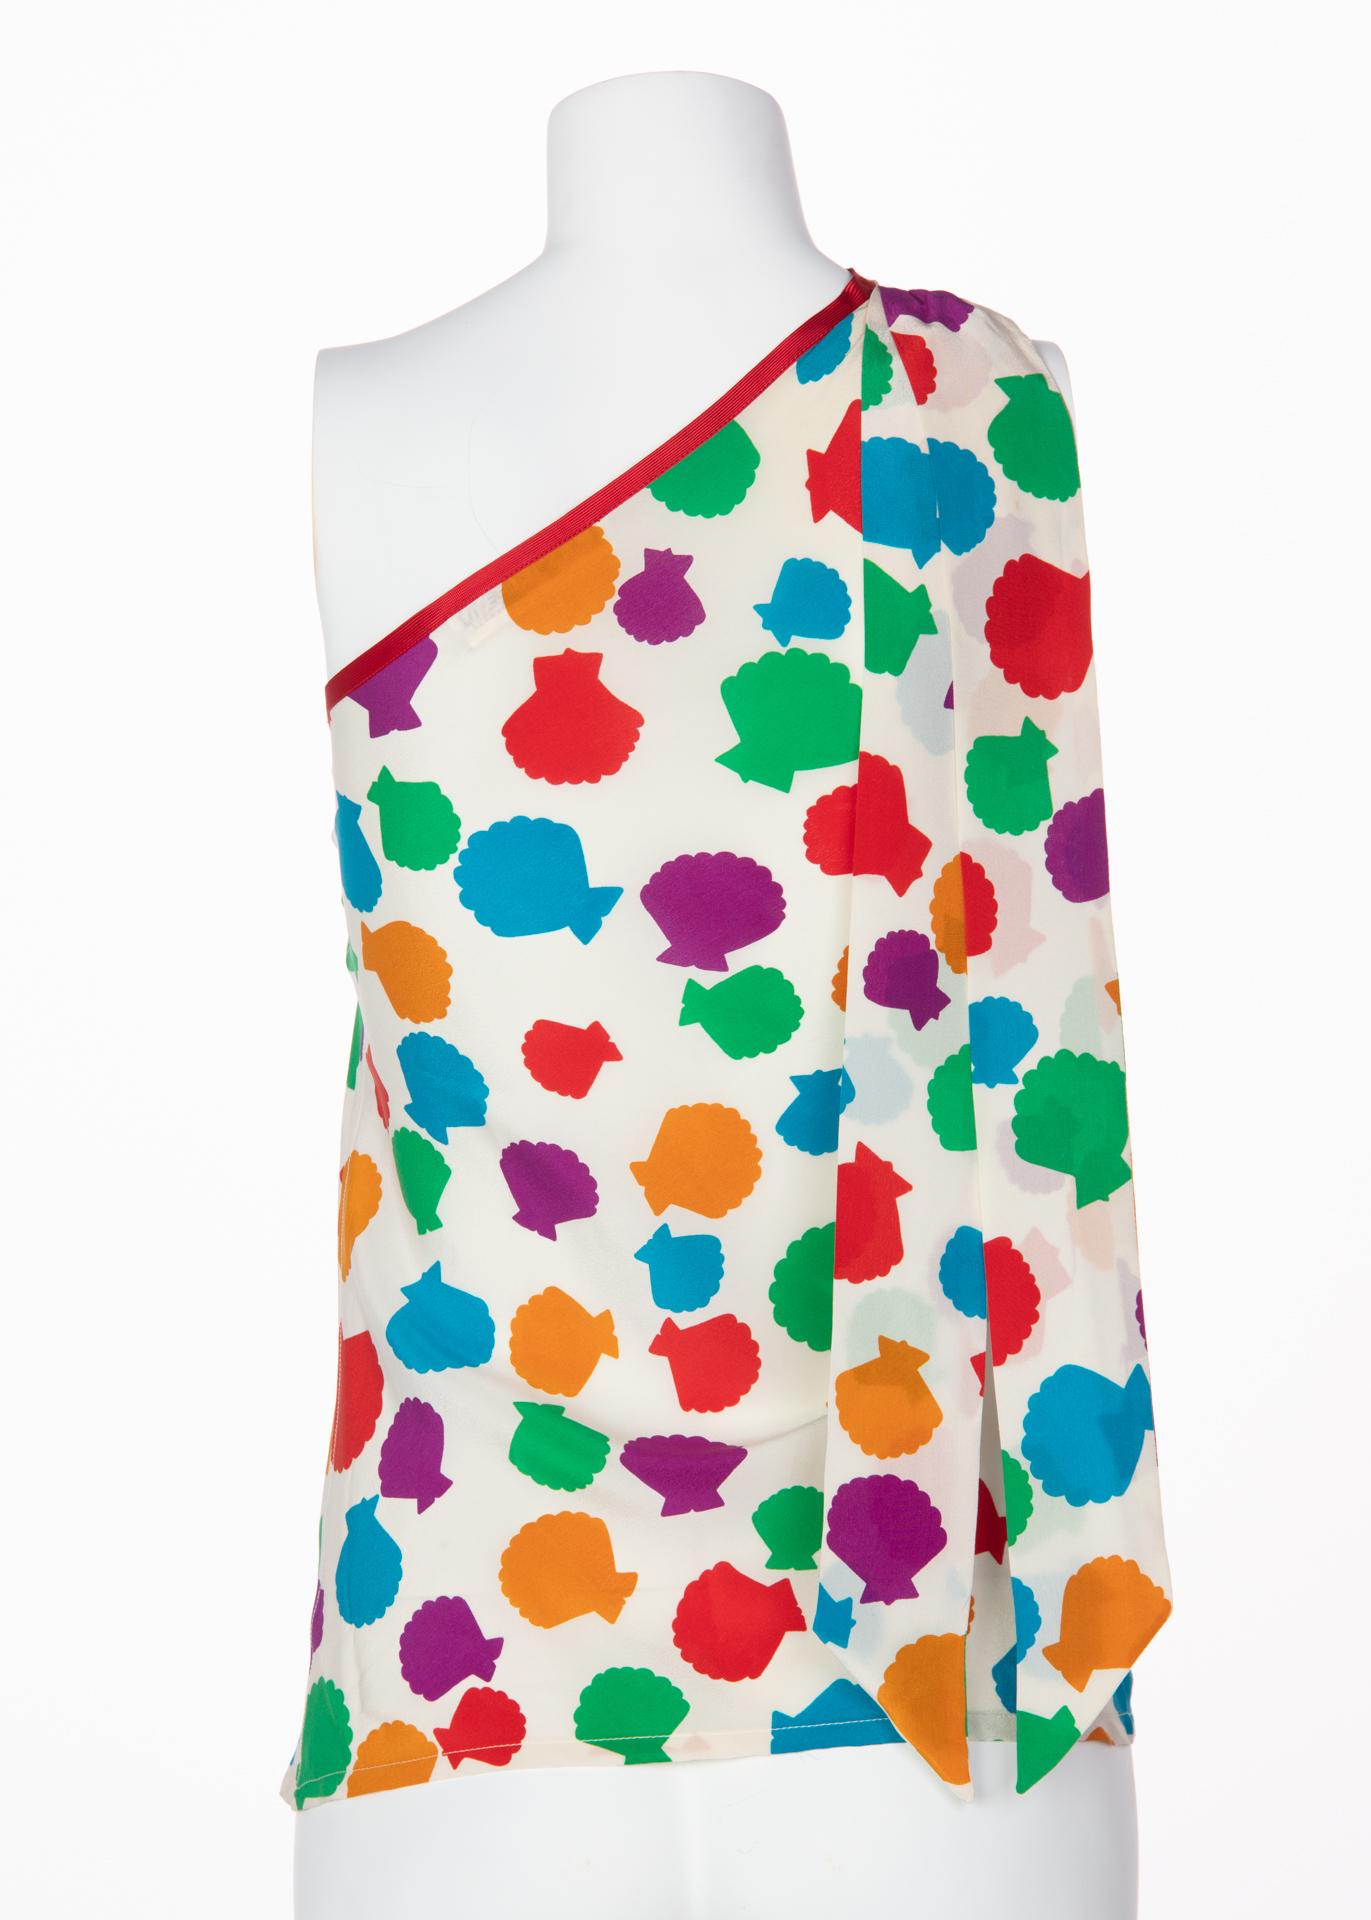 Among various influences and inspirations, pop-art stylings frequent many YSL designs. His affinity for eccentric prints and quirky color combinations ensured a jovial mood to his garments. Circa the mid-1970s, this one-shoulder blouse dons a